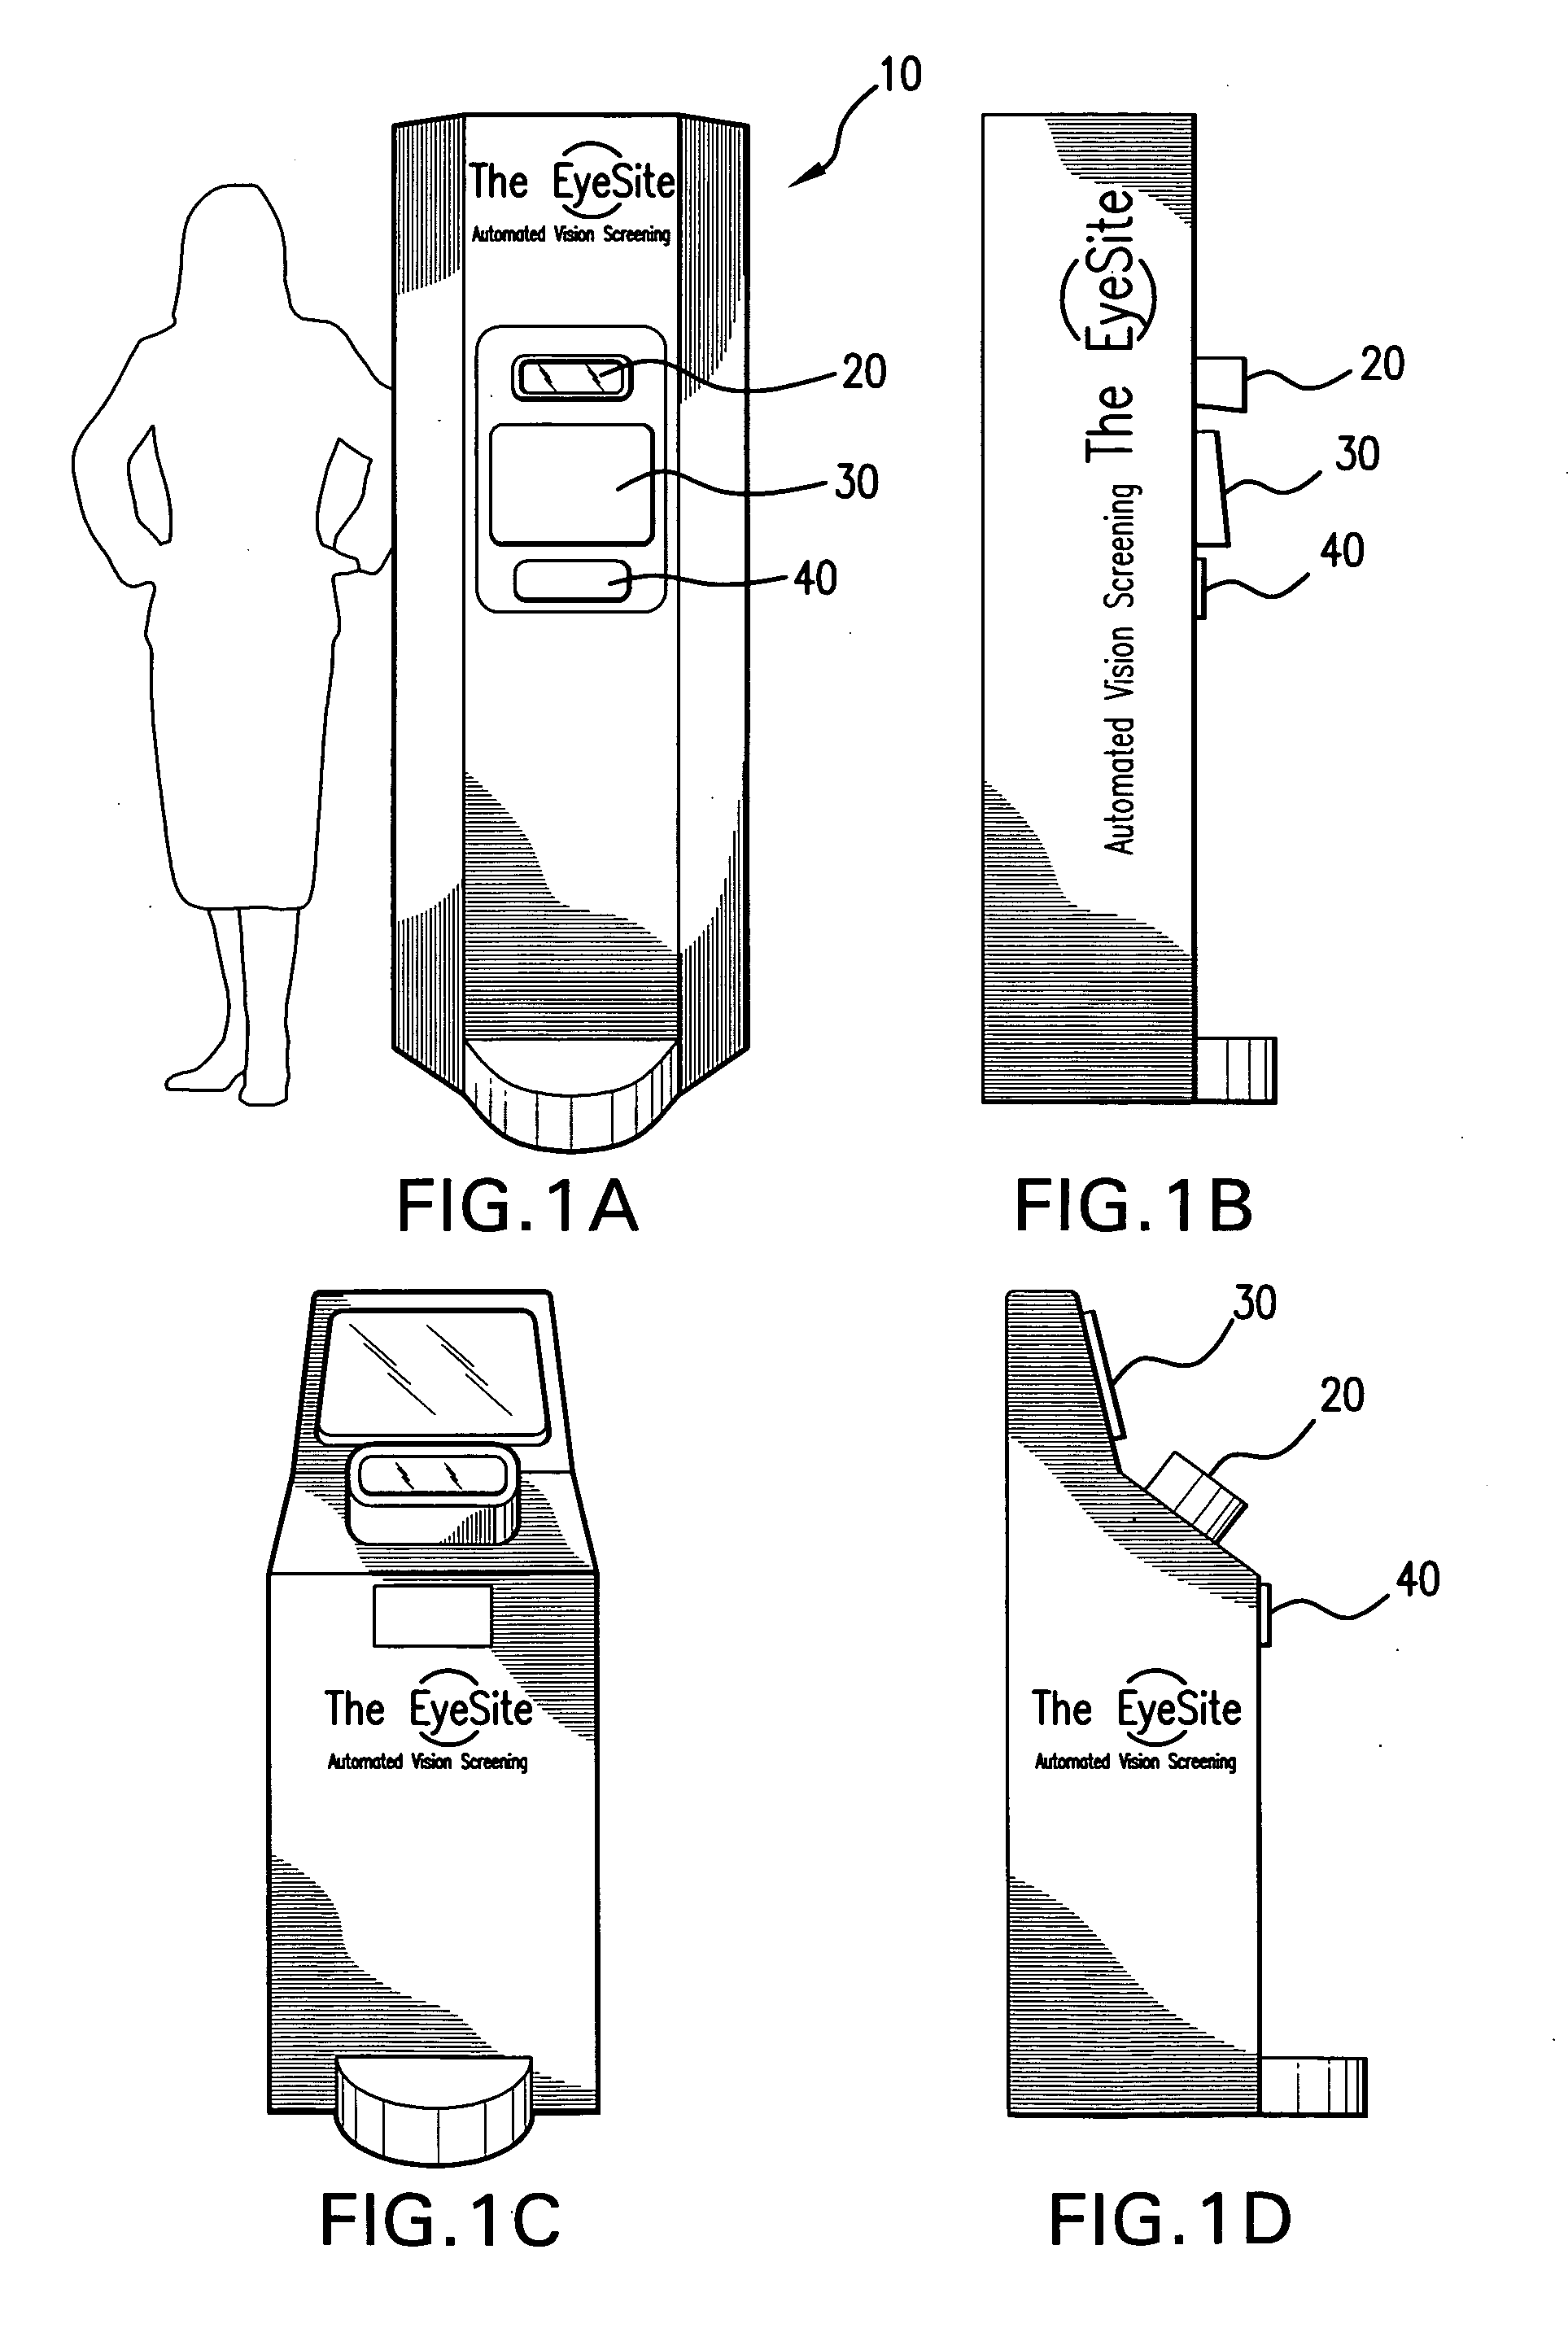 Automated vision screening apparatus and method